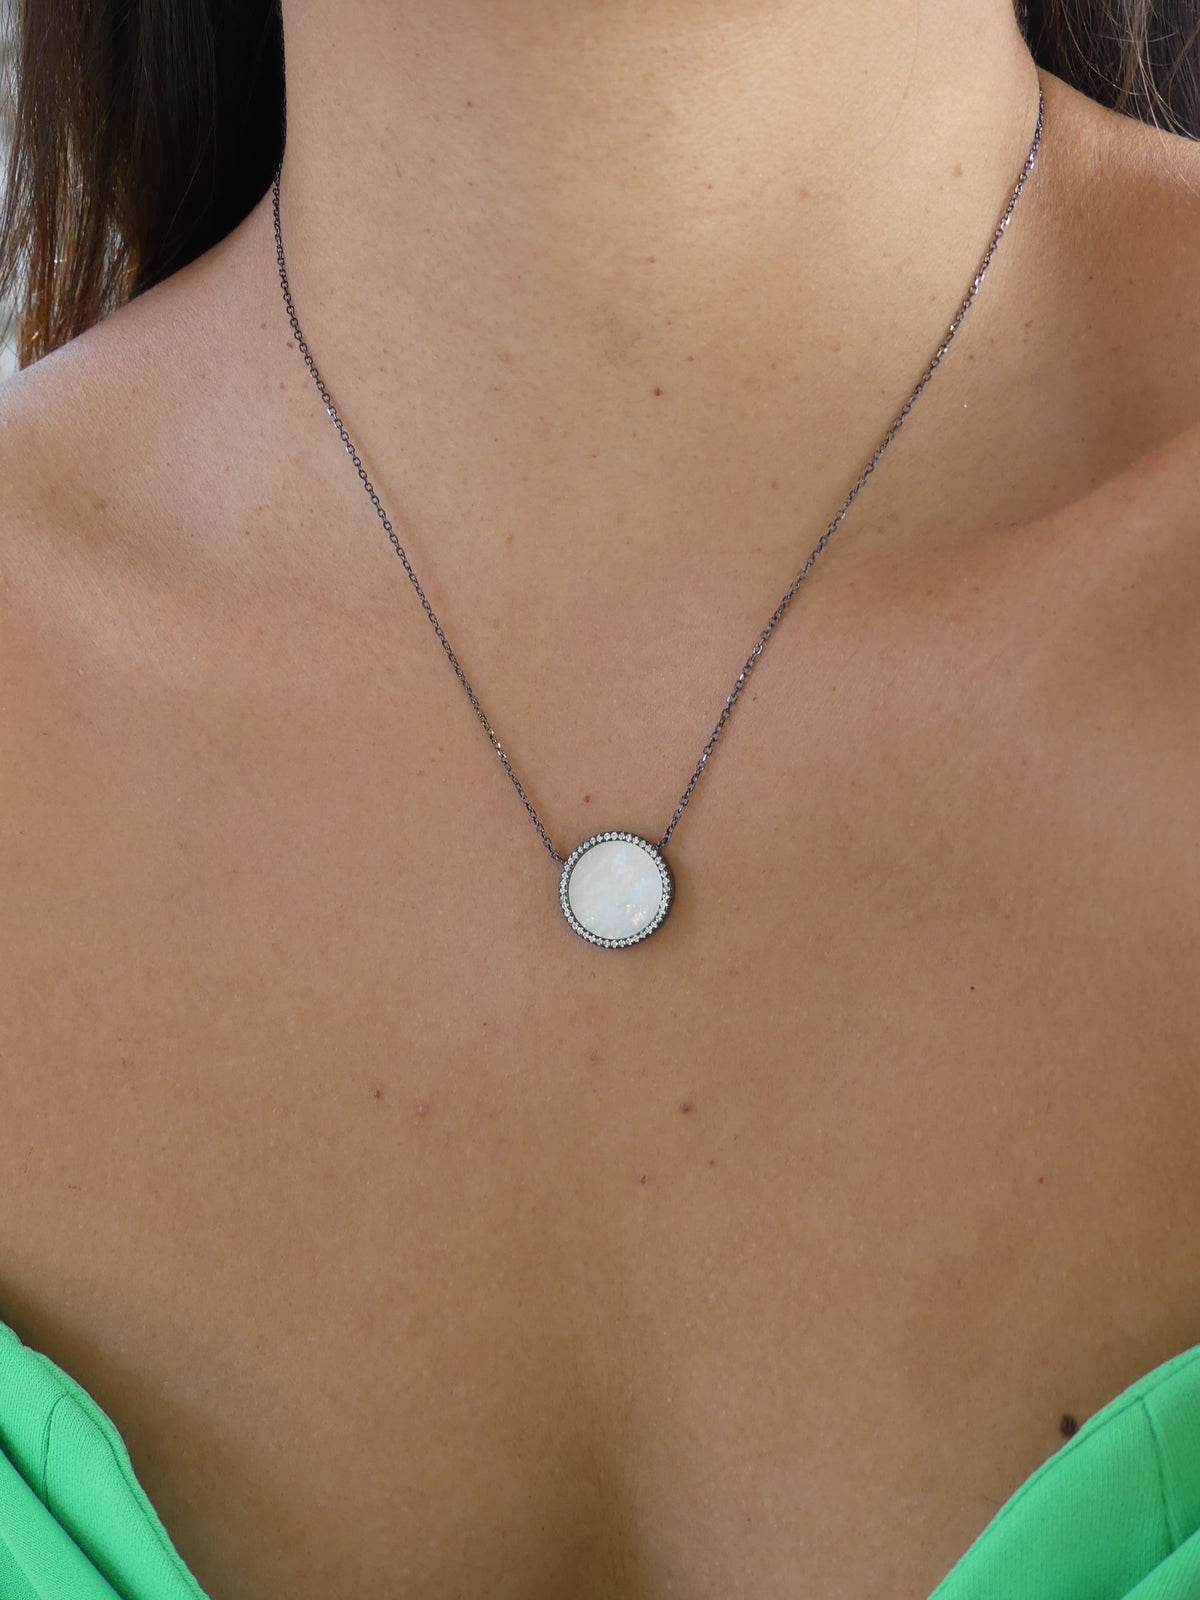 mother of pearl dainty necklace black rhodium jewelry round circle mother of pearl necklace unicorn style Iridescence unique necklaces gift idea cute trending popular unique Jewelry Kesley Boutique  